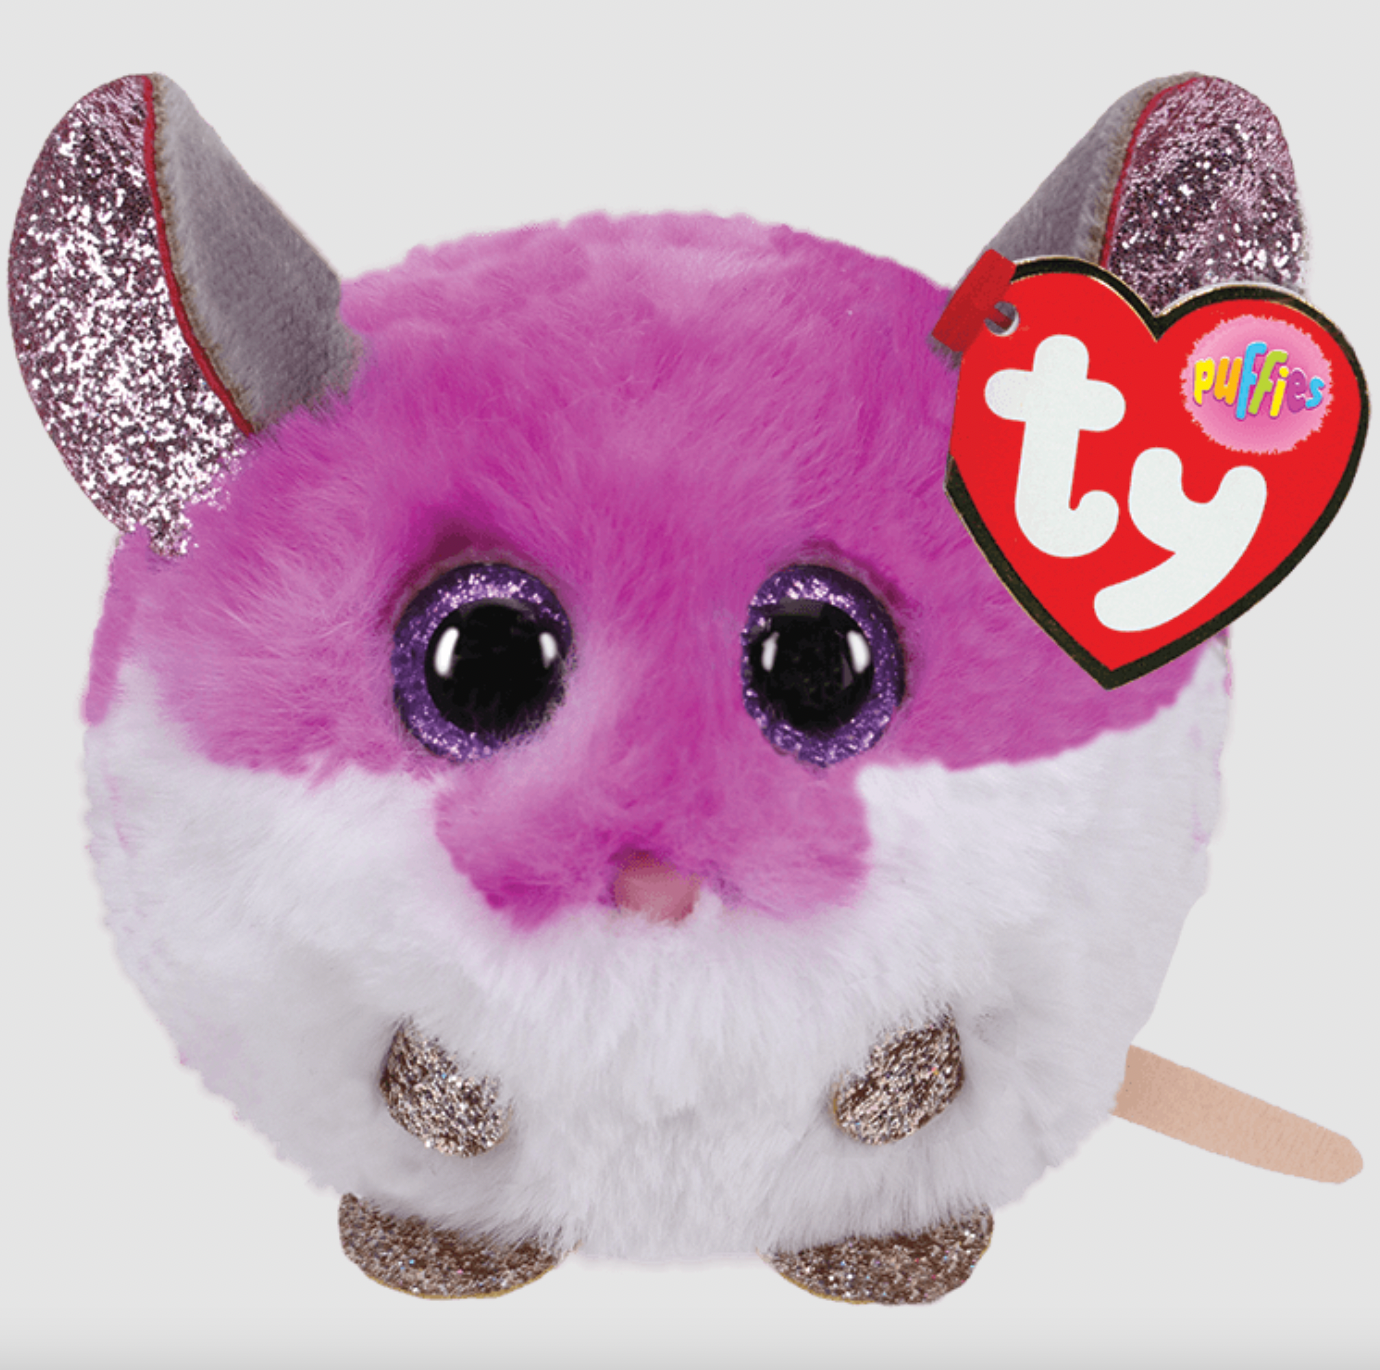 COLBY PURPLE MOUSE BEANIE BALL